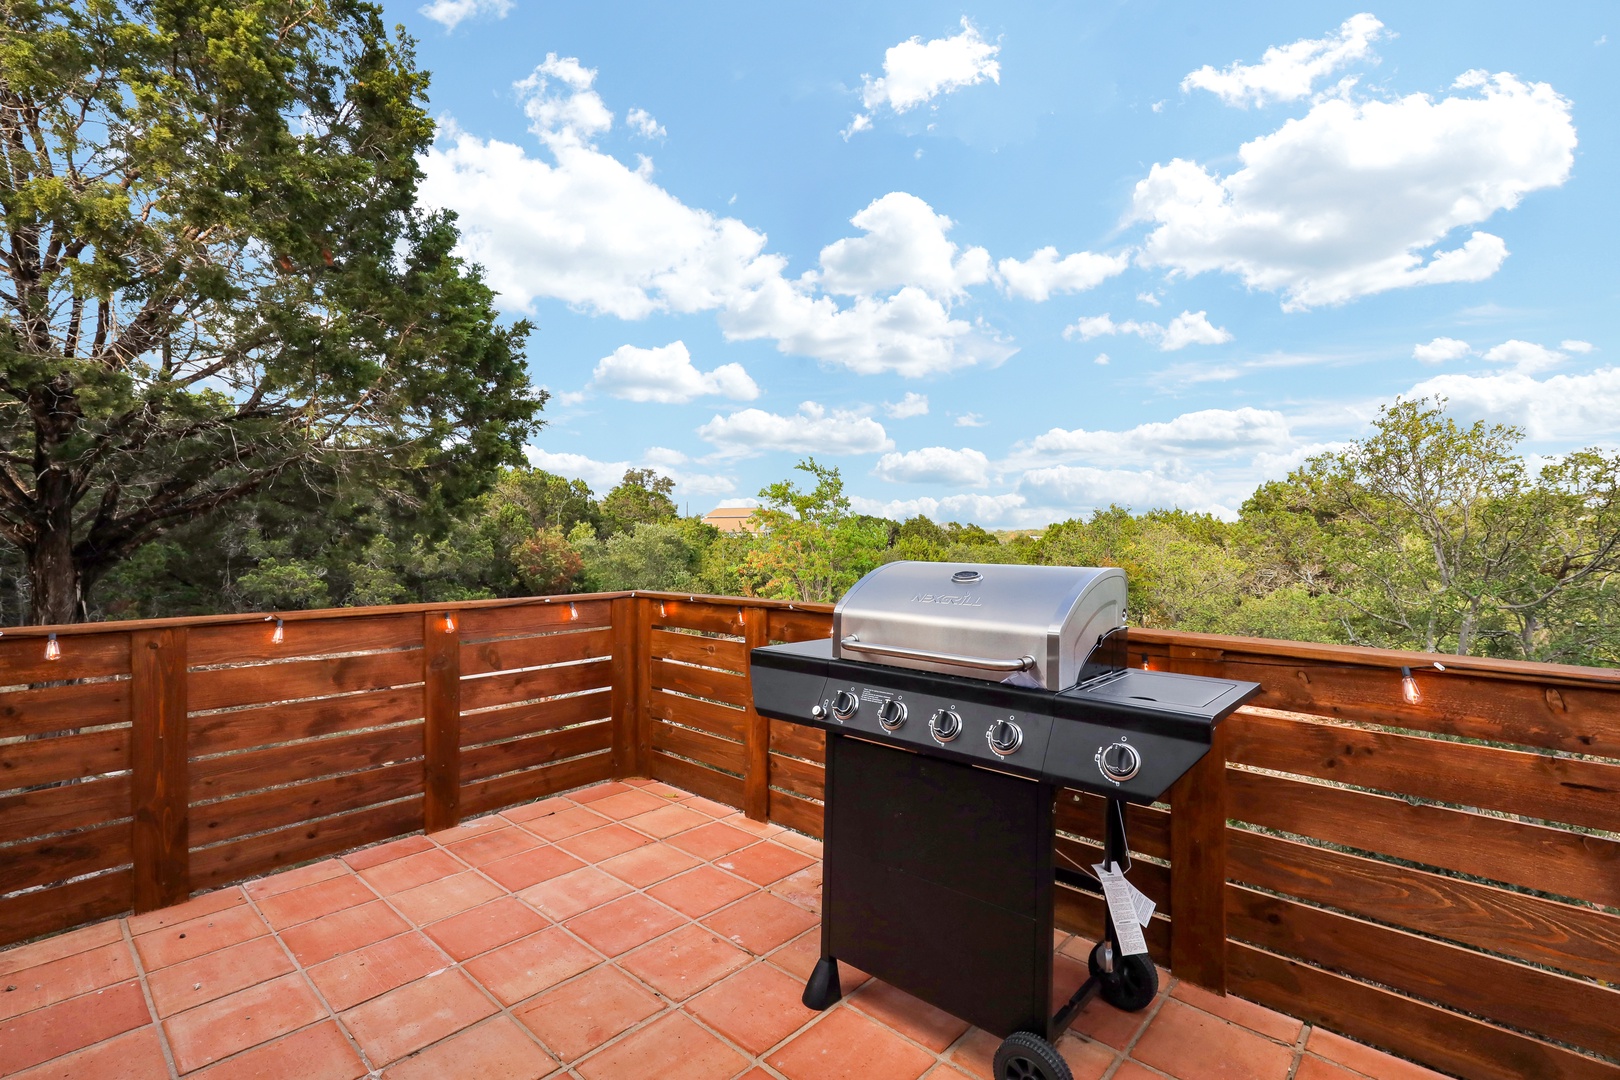 Take in stunning treetop views while you grill up a feast on the deck